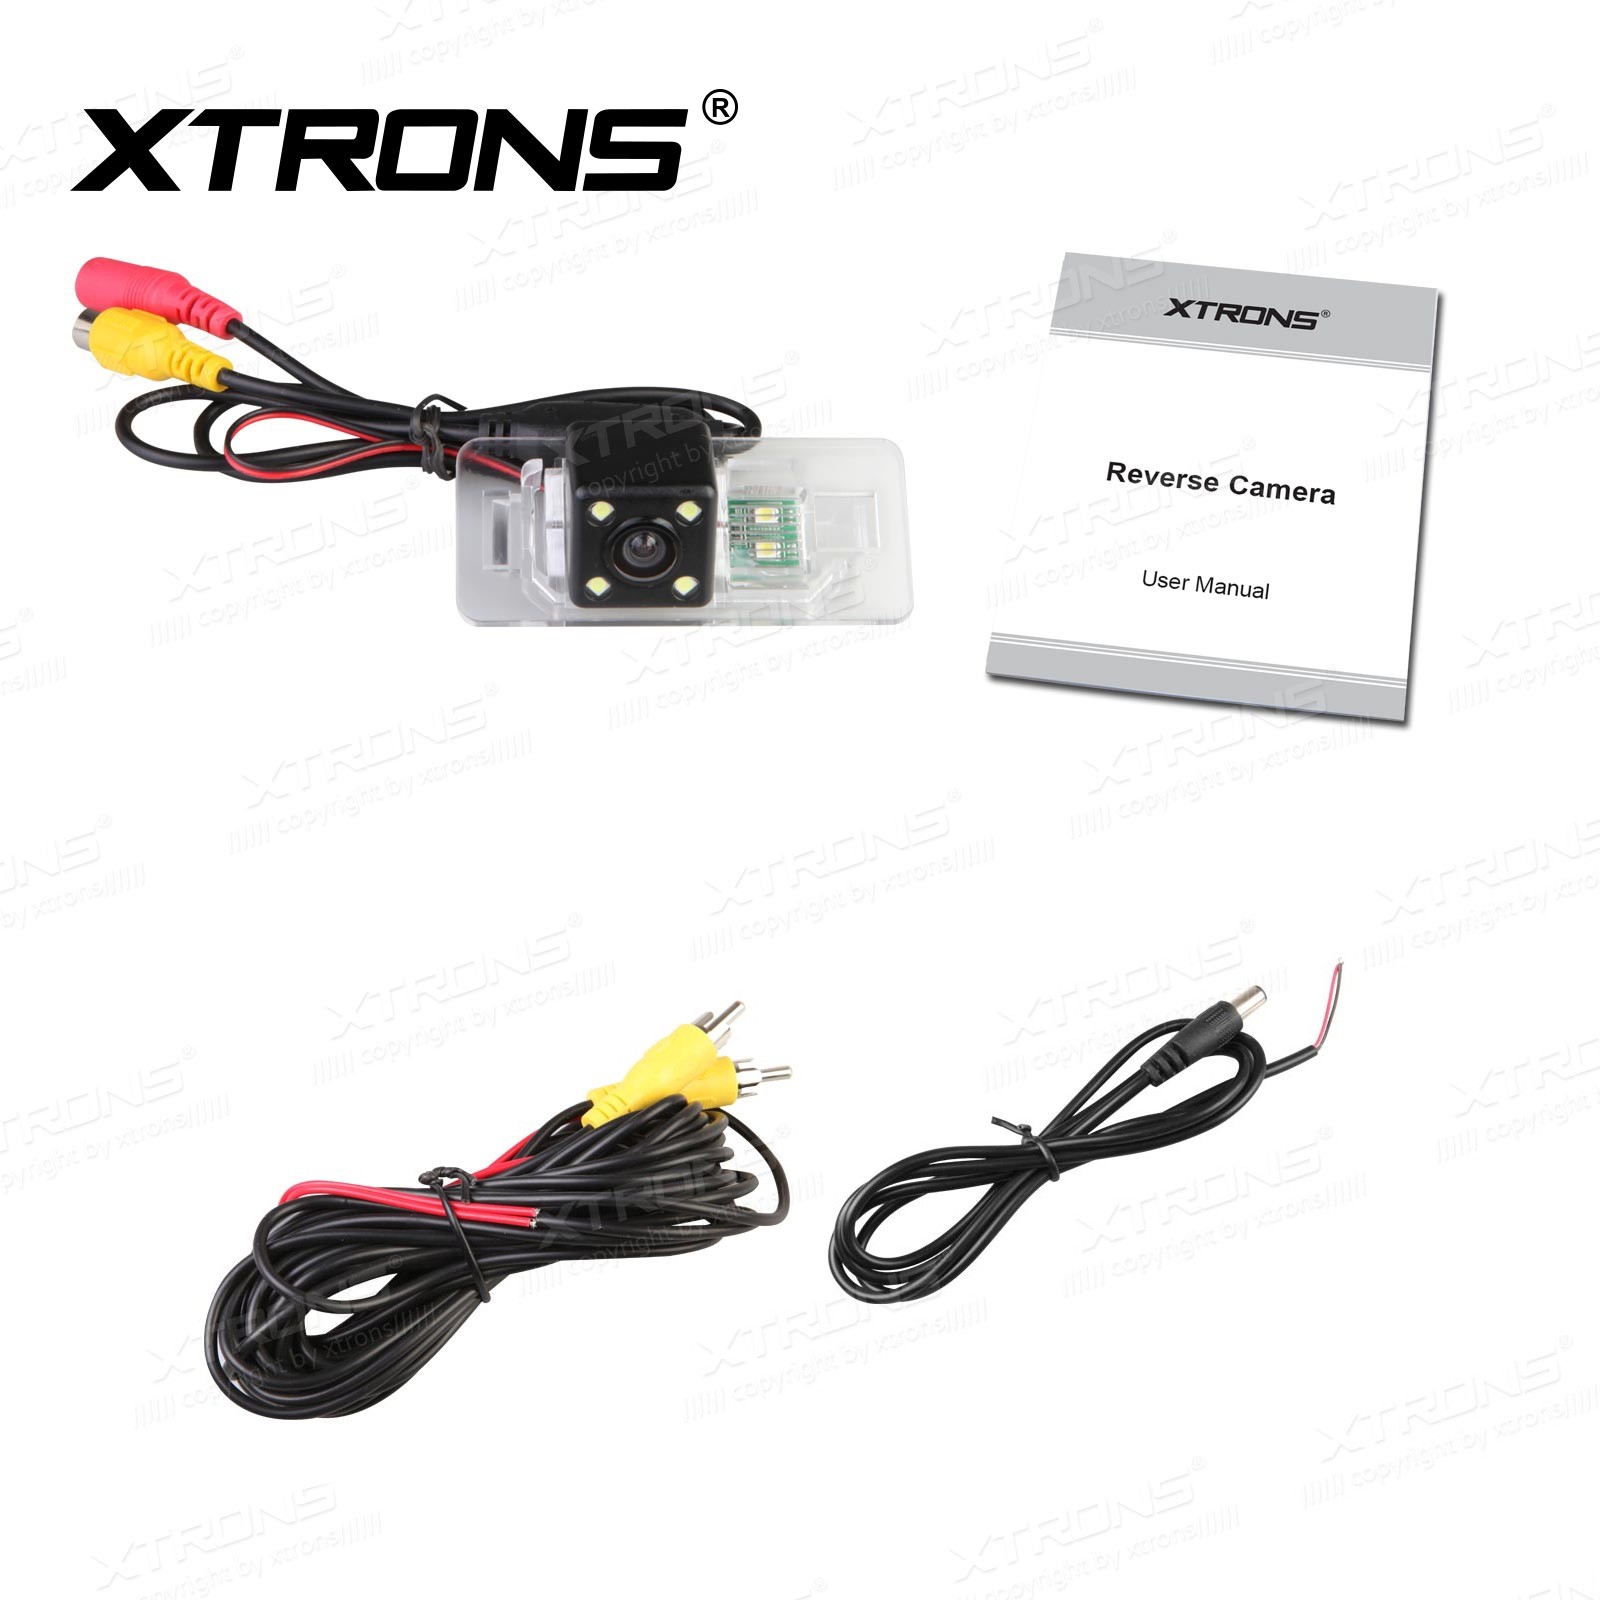 BMW X5 / 3.s / 5.s / E70 / E90 / E60, Xtrons Parking Rear View Camera with RCA Connector for Multimedia Navigation Radio. Rear view camera for aftermarket radio